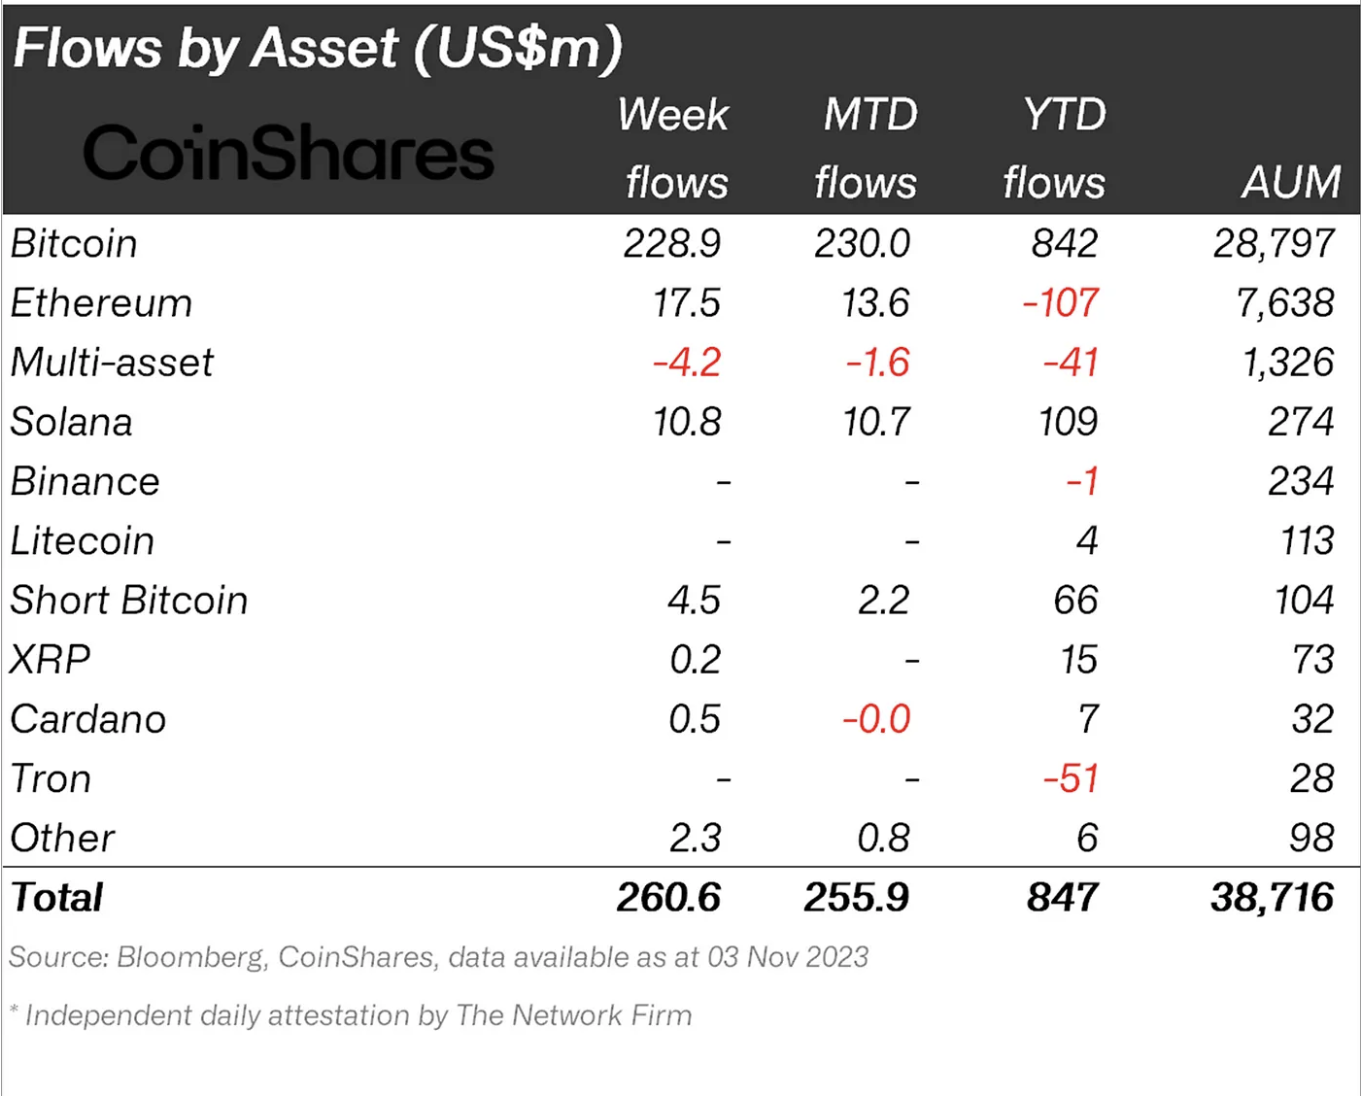 Flows by asset.